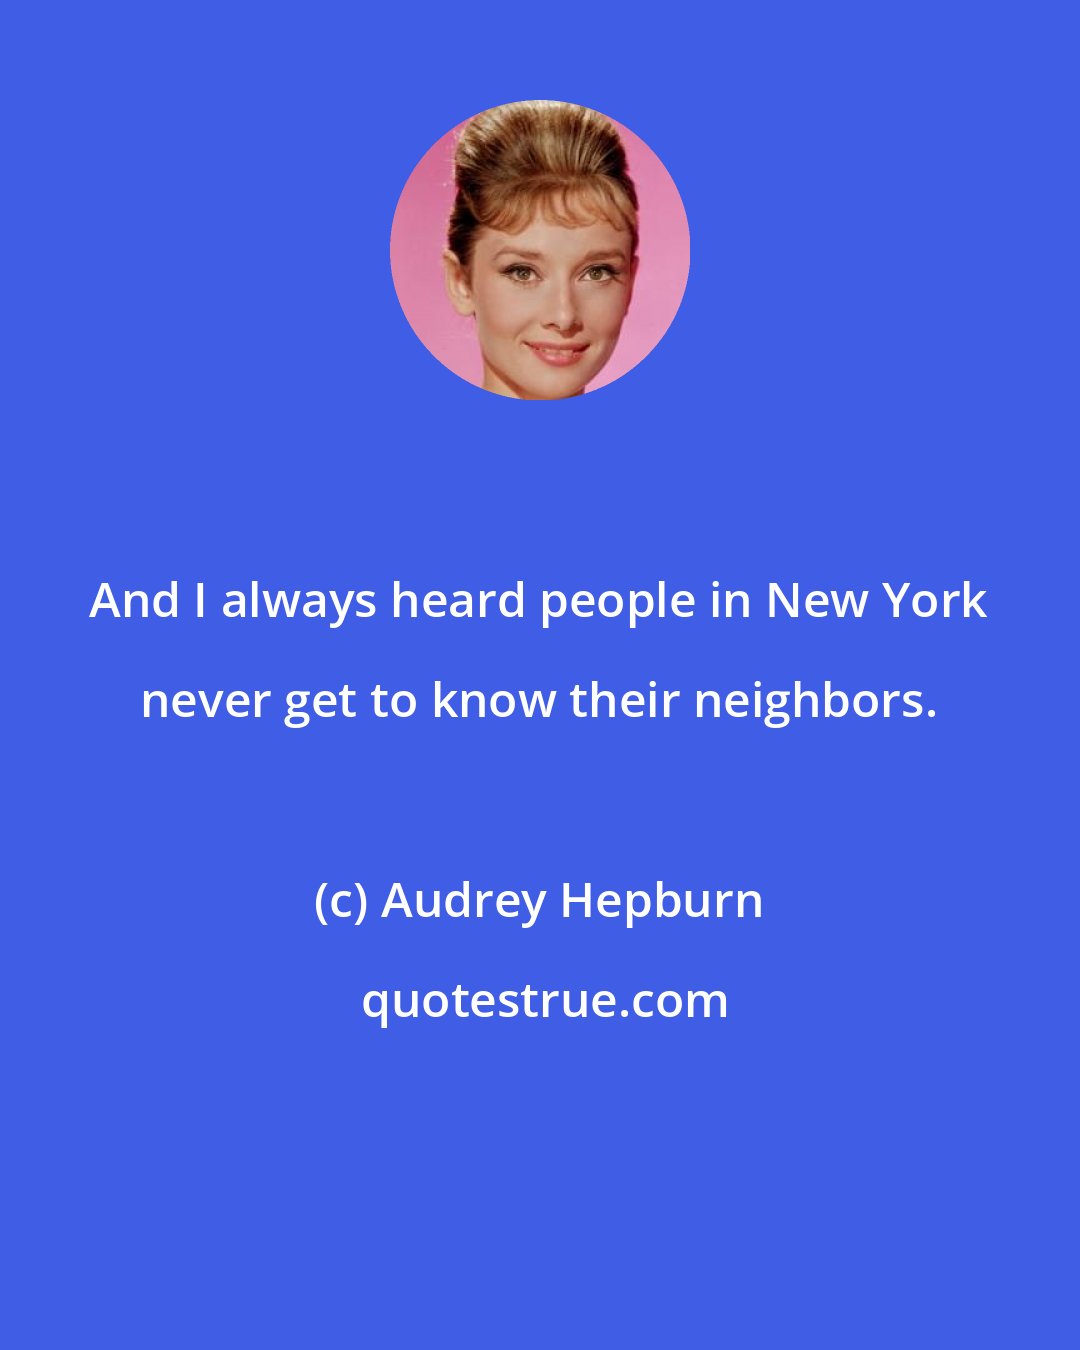 Audrey Hepburn: And I always heard people in New York never get to know their neighbors.